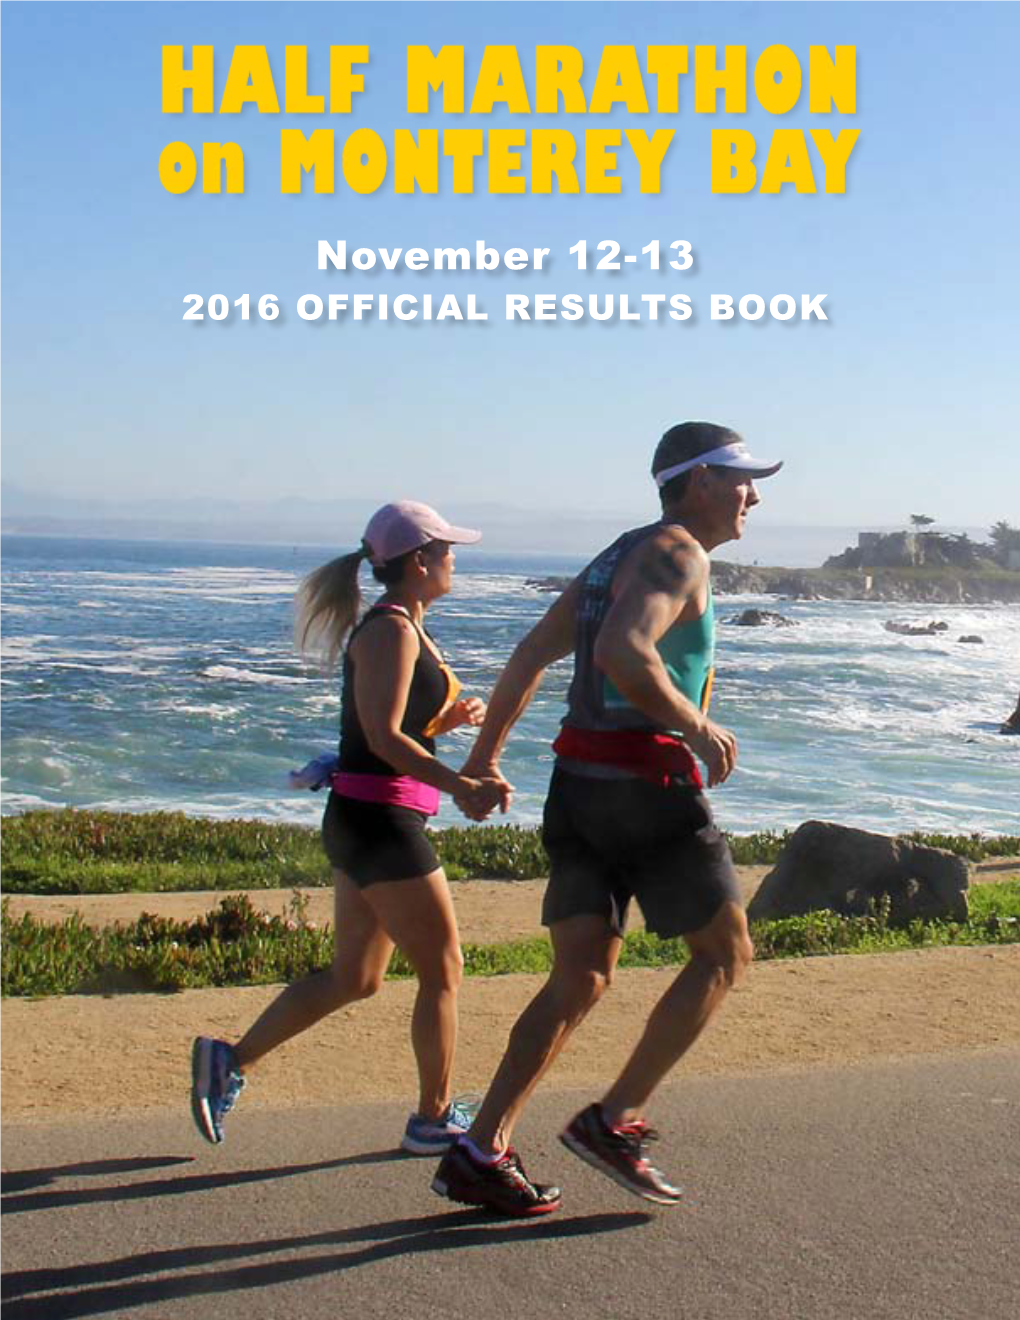 November 12-13 2016 OFFICIAL RESULTS BOOK 2016 Official Race Results